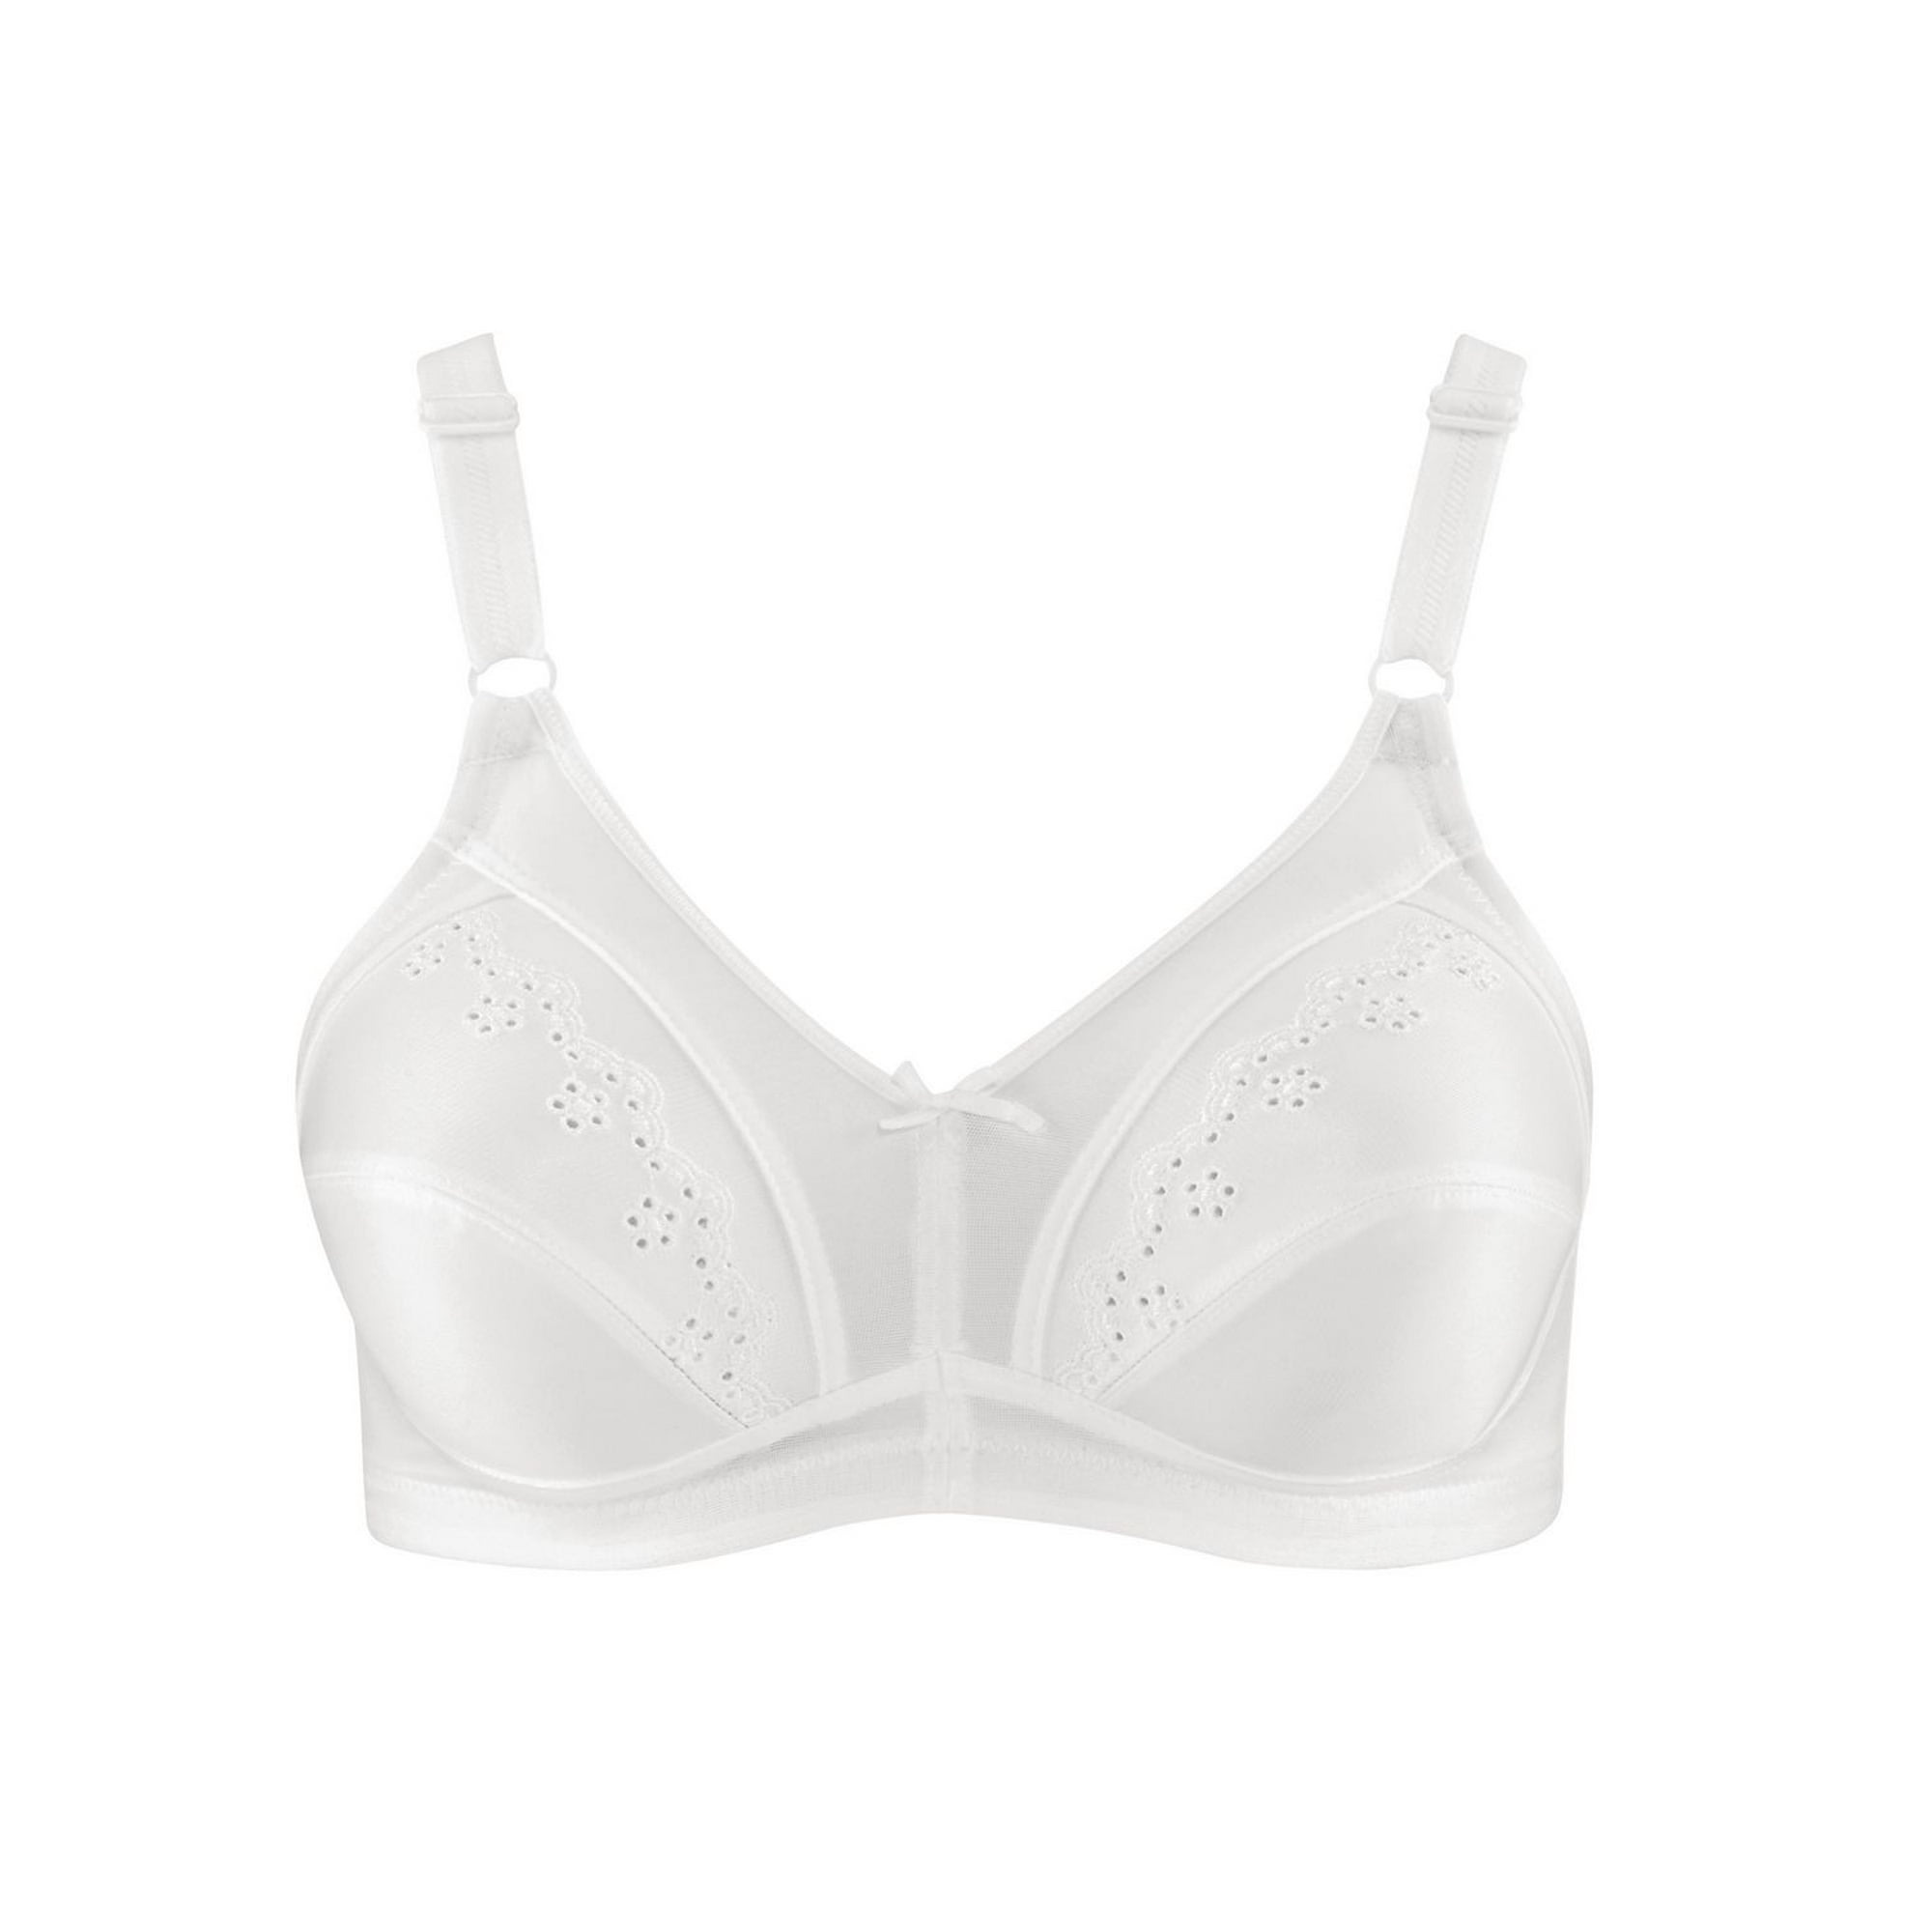 WonderBra style 2421 - Full support wire free with side shaping, Walmart.ca